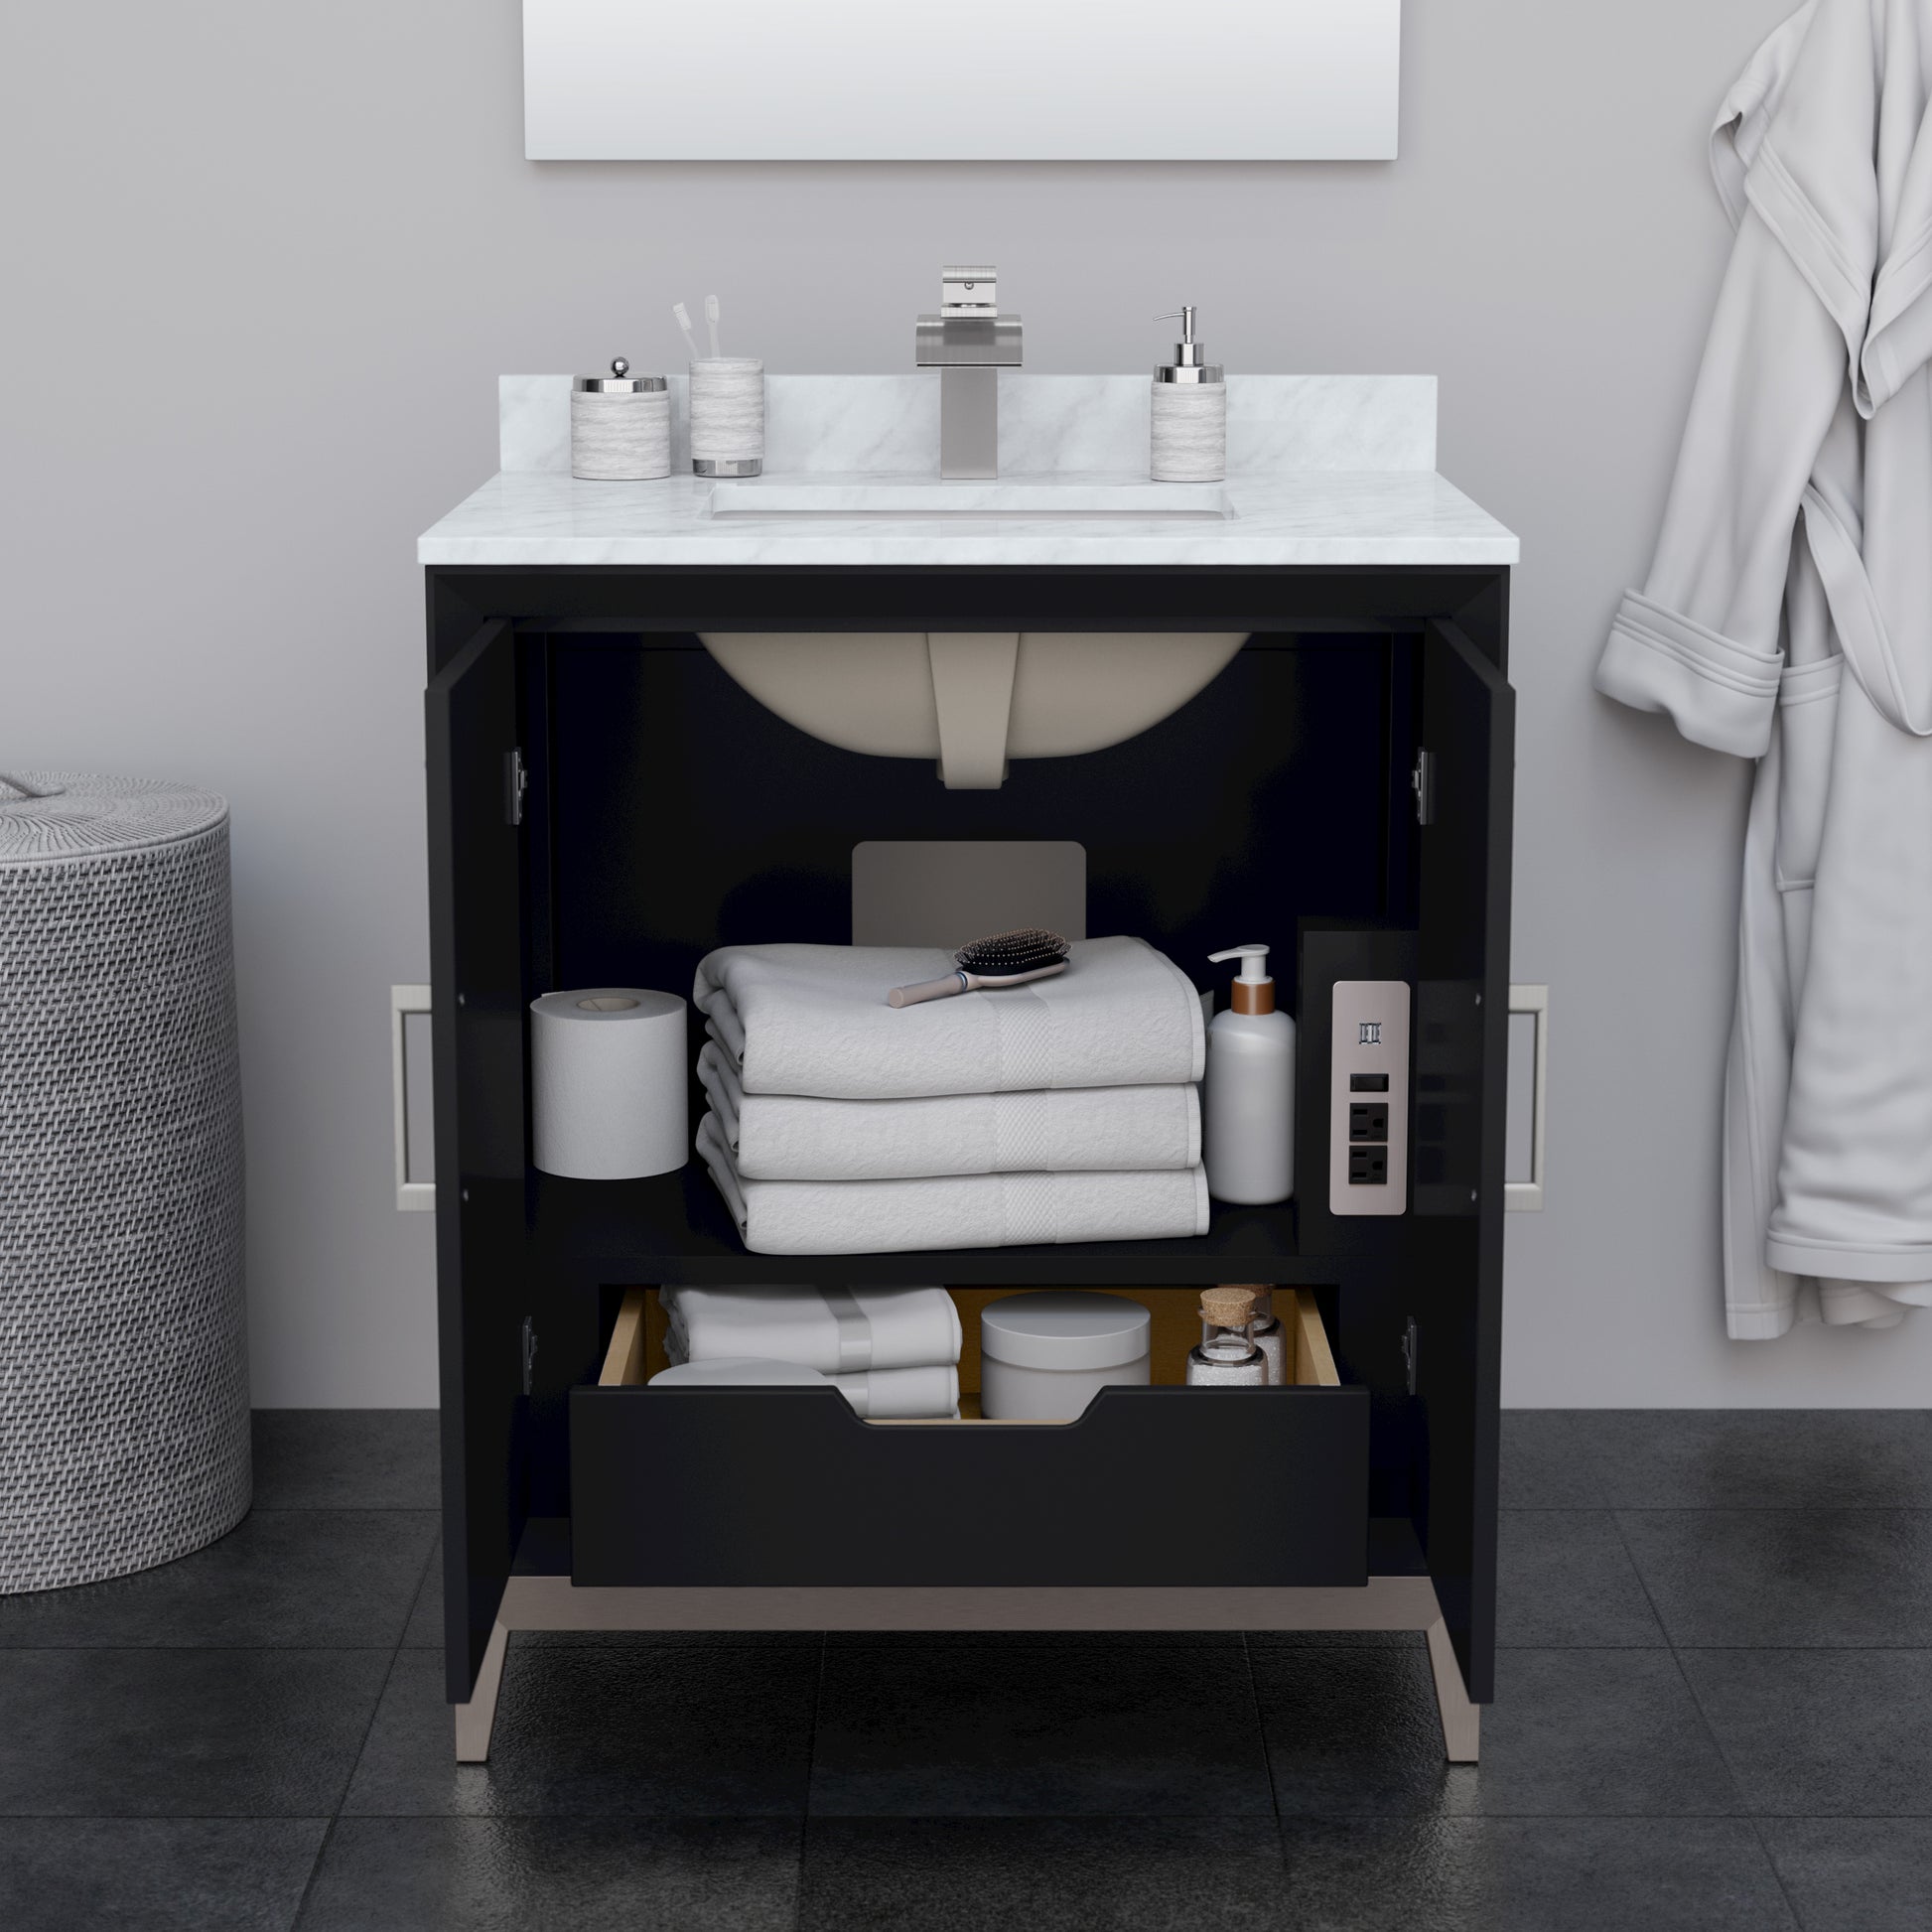 
  
  Marlena Single Sink Vanity with Cultured Marble, Undermount Square Sink, Optional Trim
  
